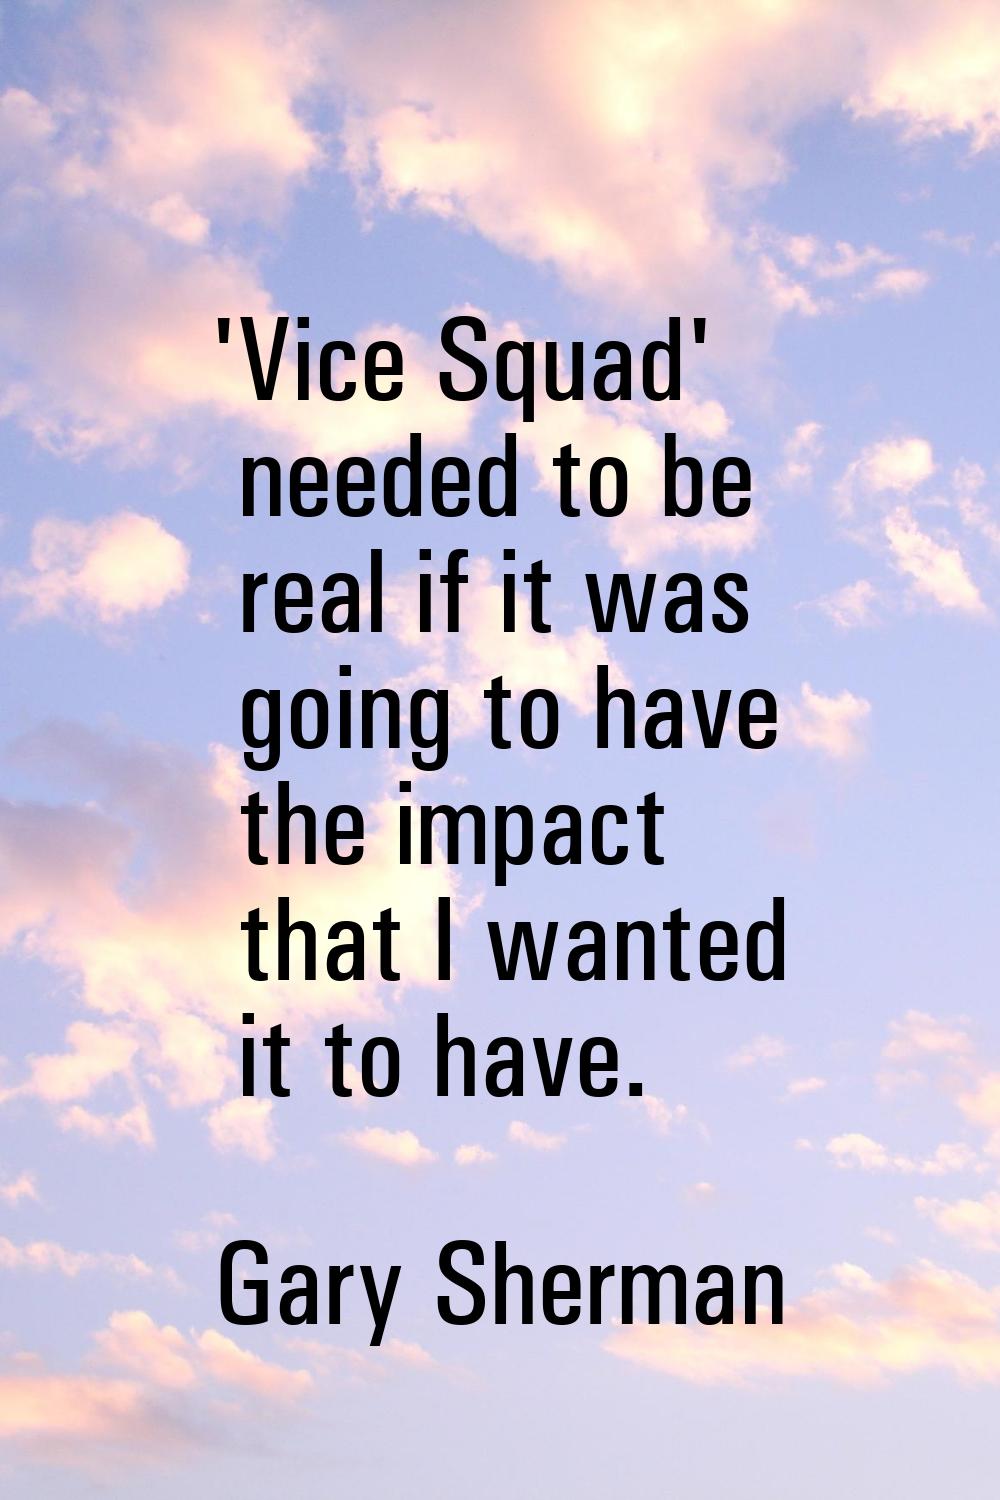 'Vice Squad' needed to be real if it was going to have the impact that I wanted it to have.